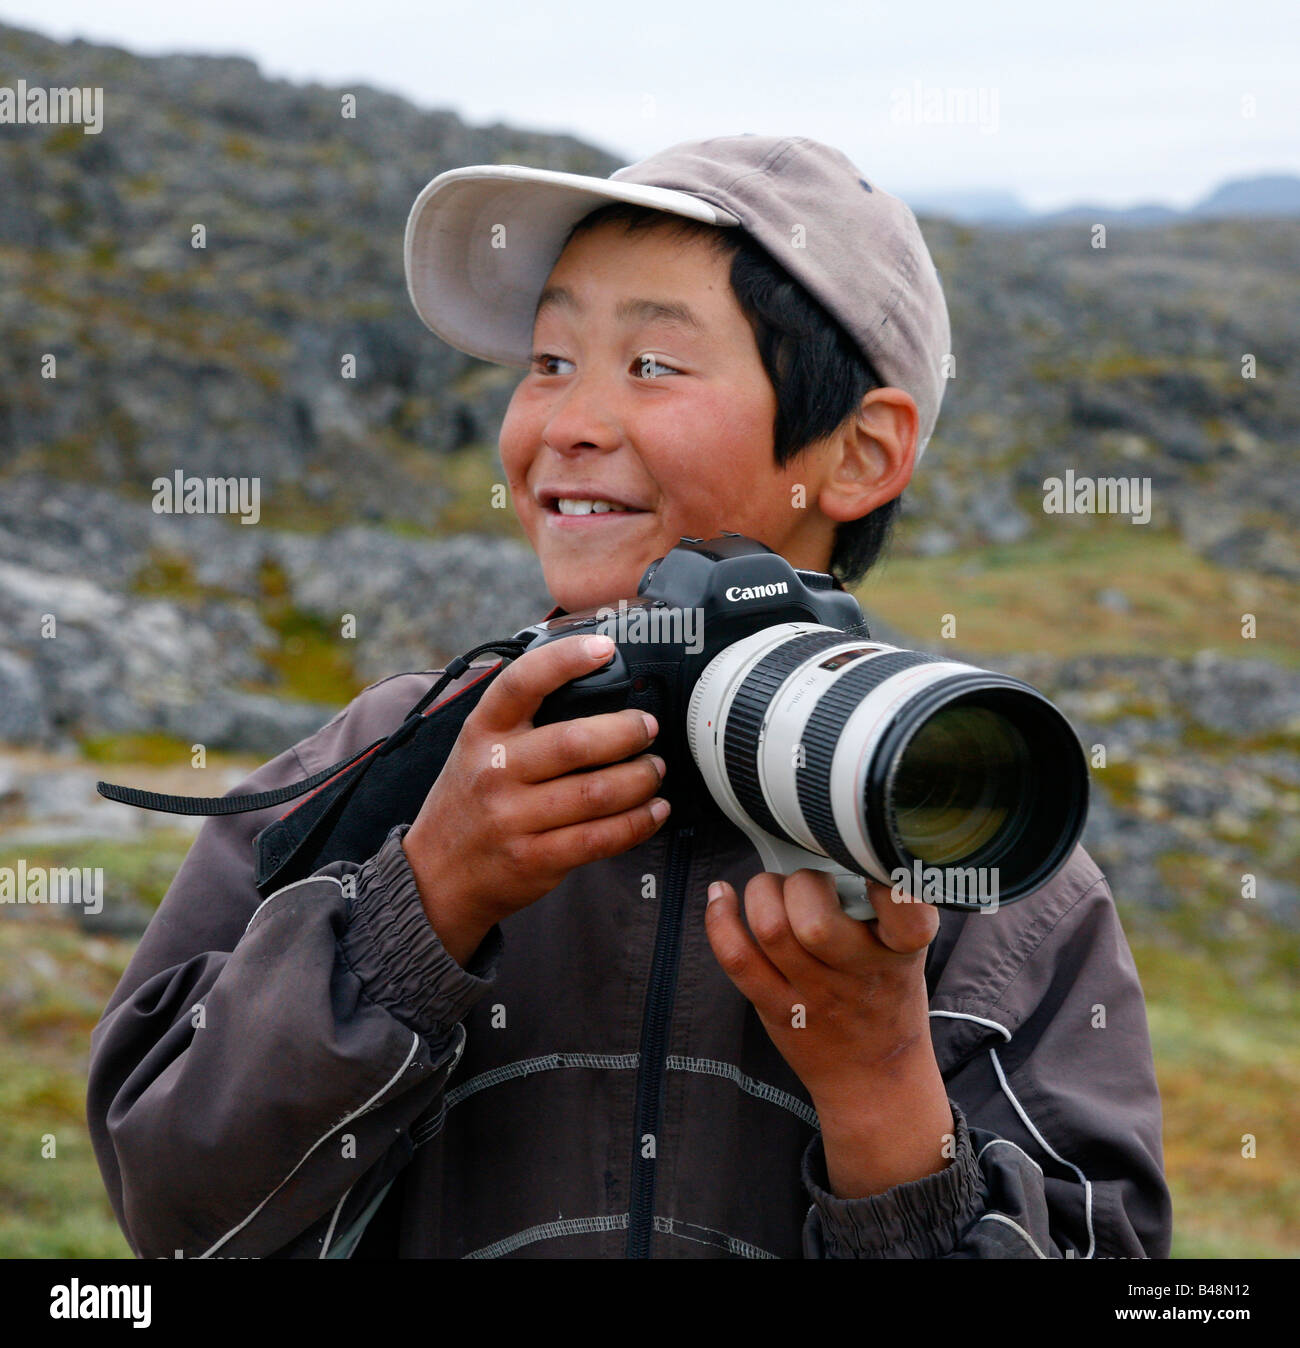 Aug 2008 - Portrait of a young teenager in the small village of Itilleq Greenland Stock Photo